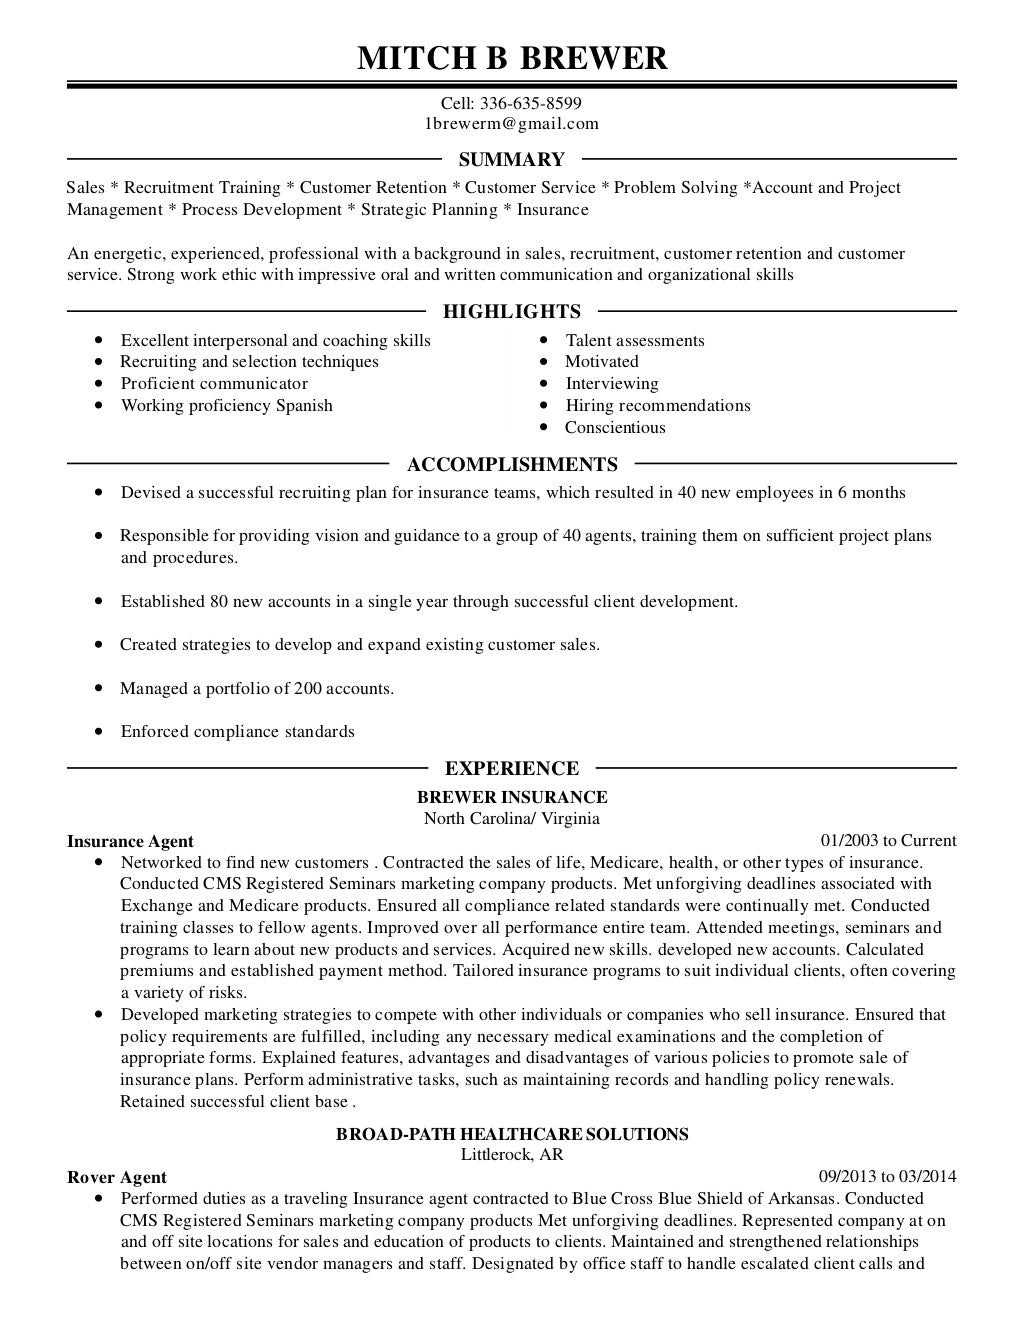 Resume Distribution to Recruiters - Good Idea or Waste of Time?